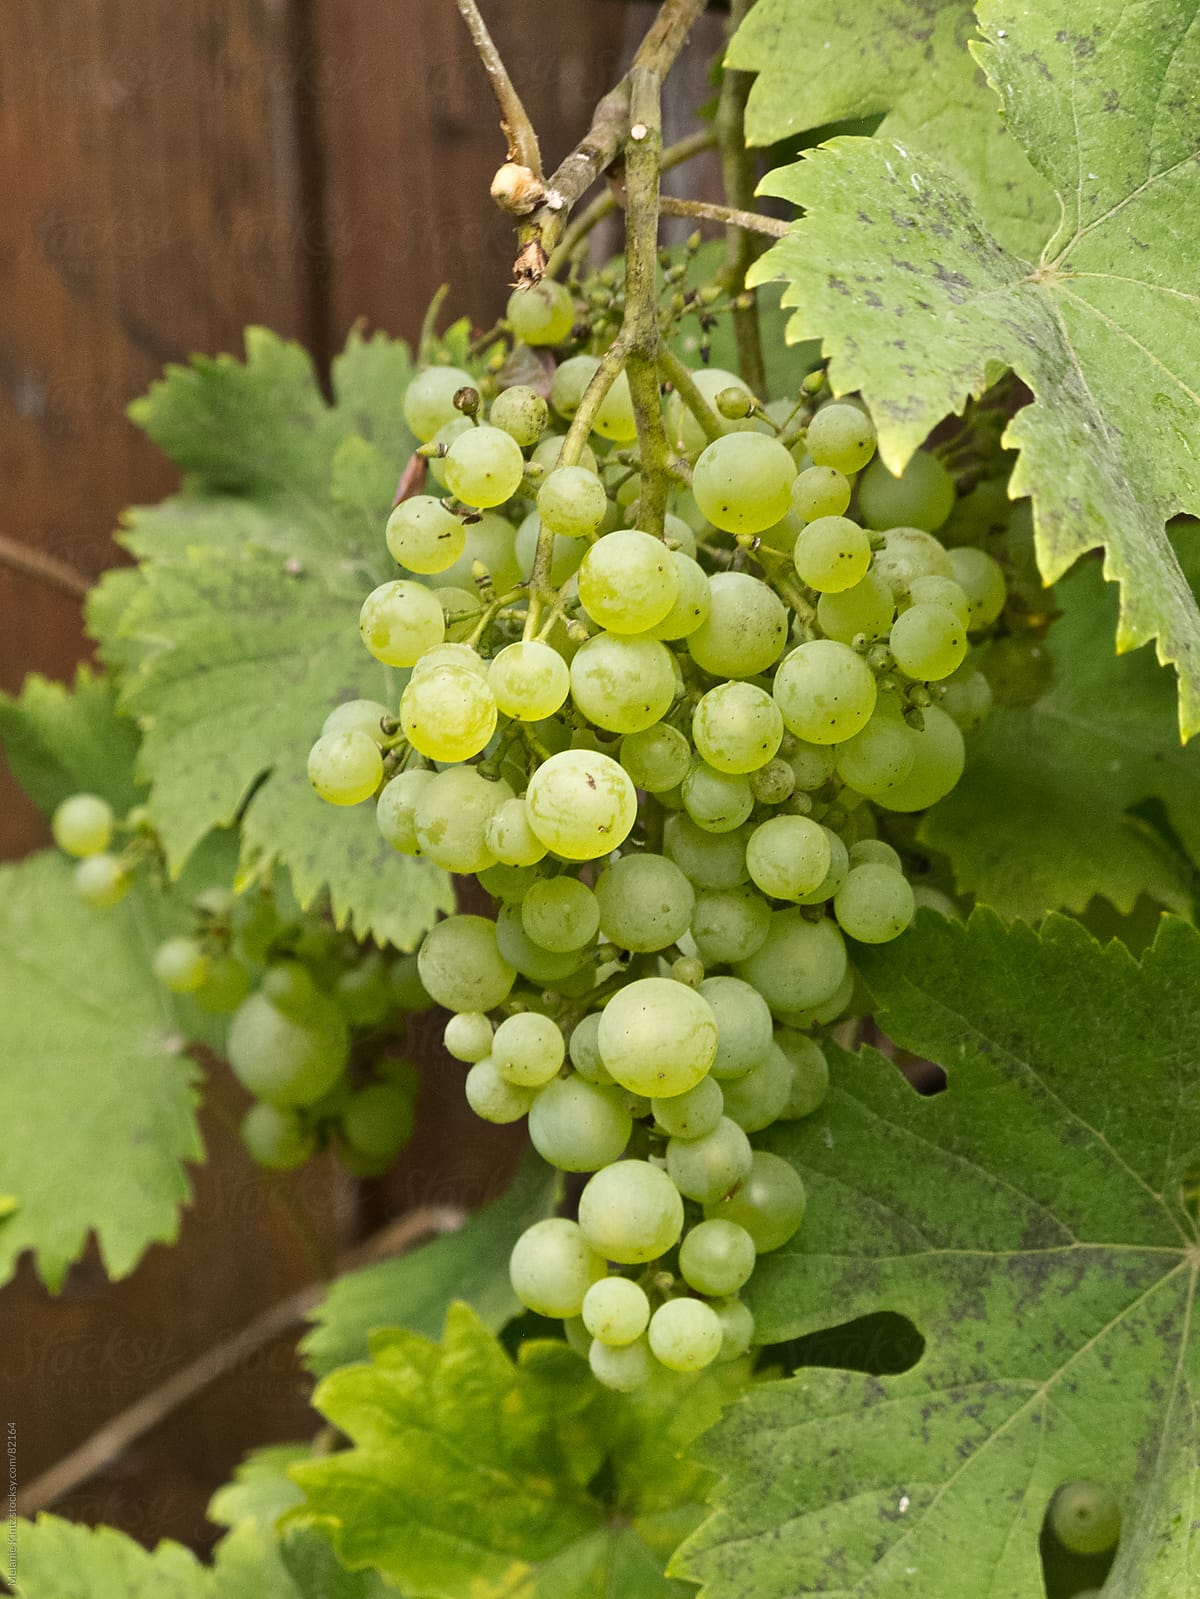 wild grapes growing before a wooden wall